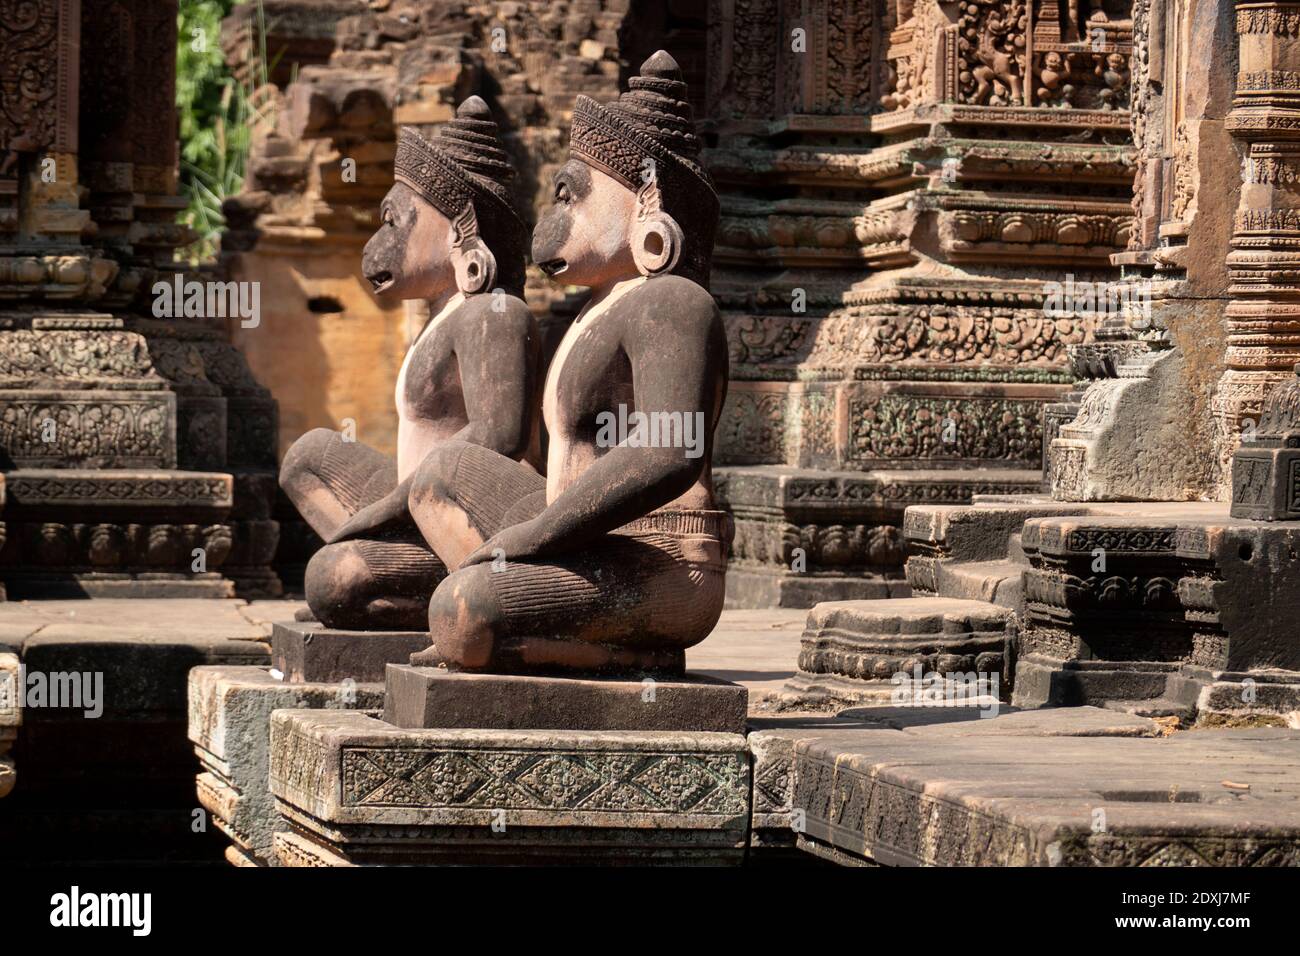 Monkey statues at the entrance of Banteay Srei Stock Photo